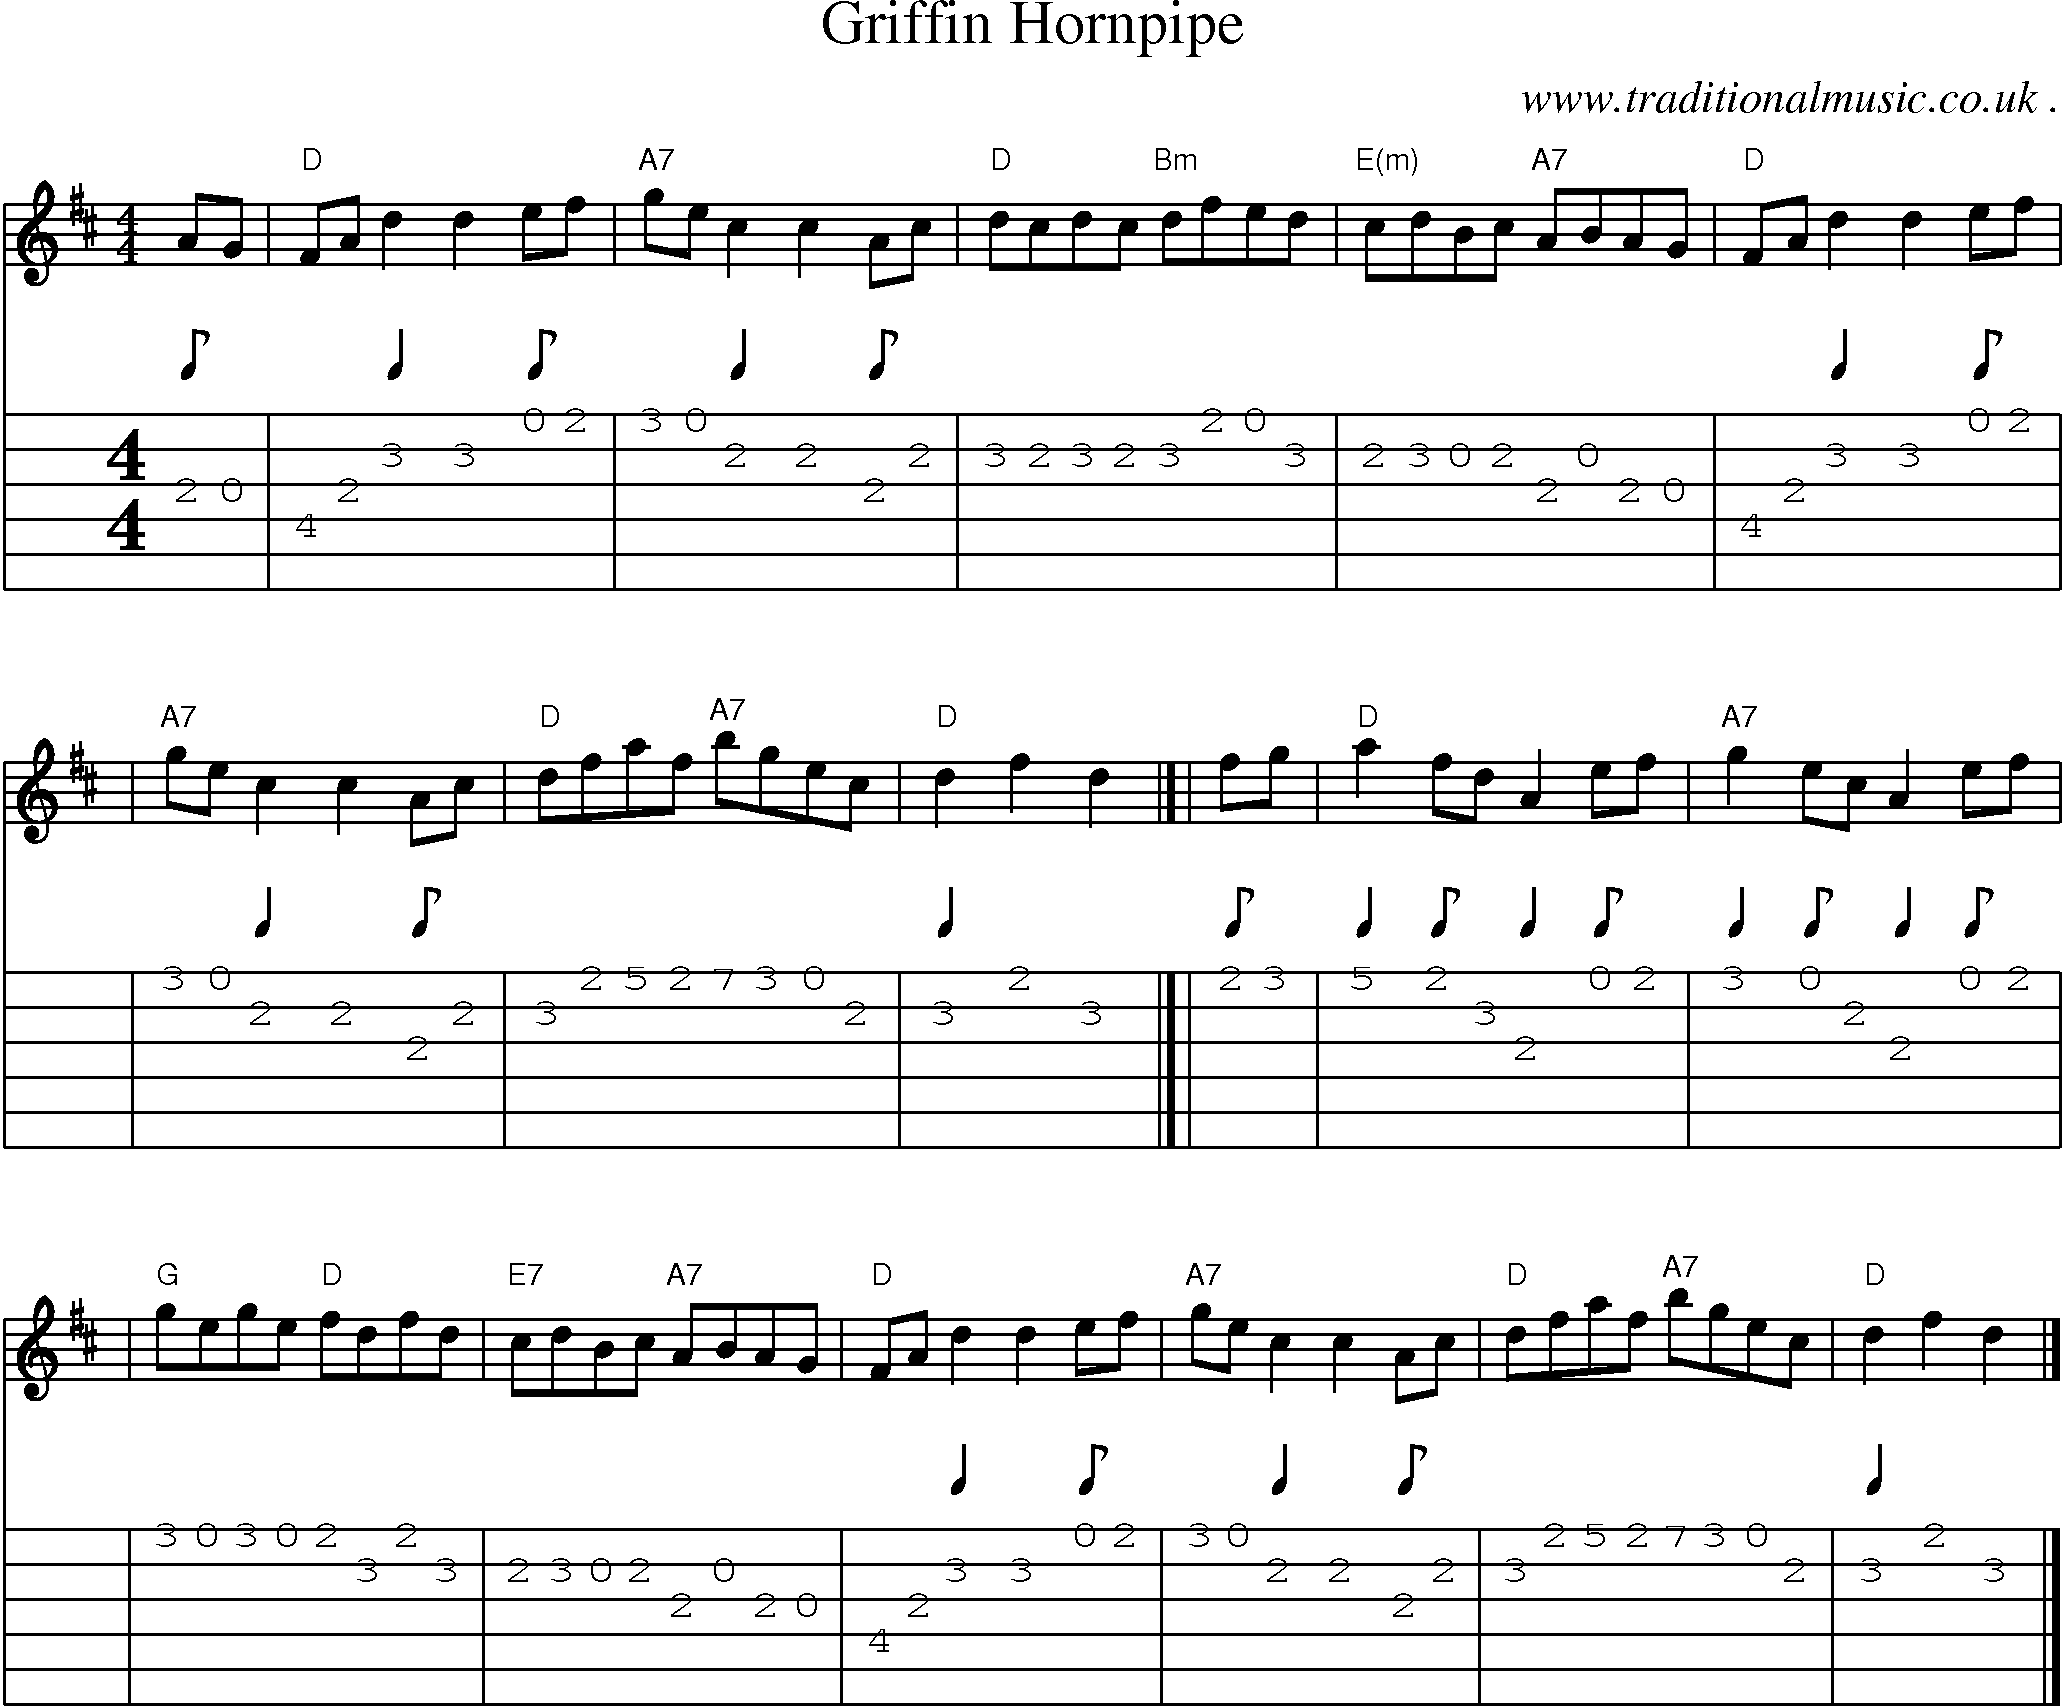 Sheet-music  score, Chords and Guitar Tabs for Griffin Hornpipe